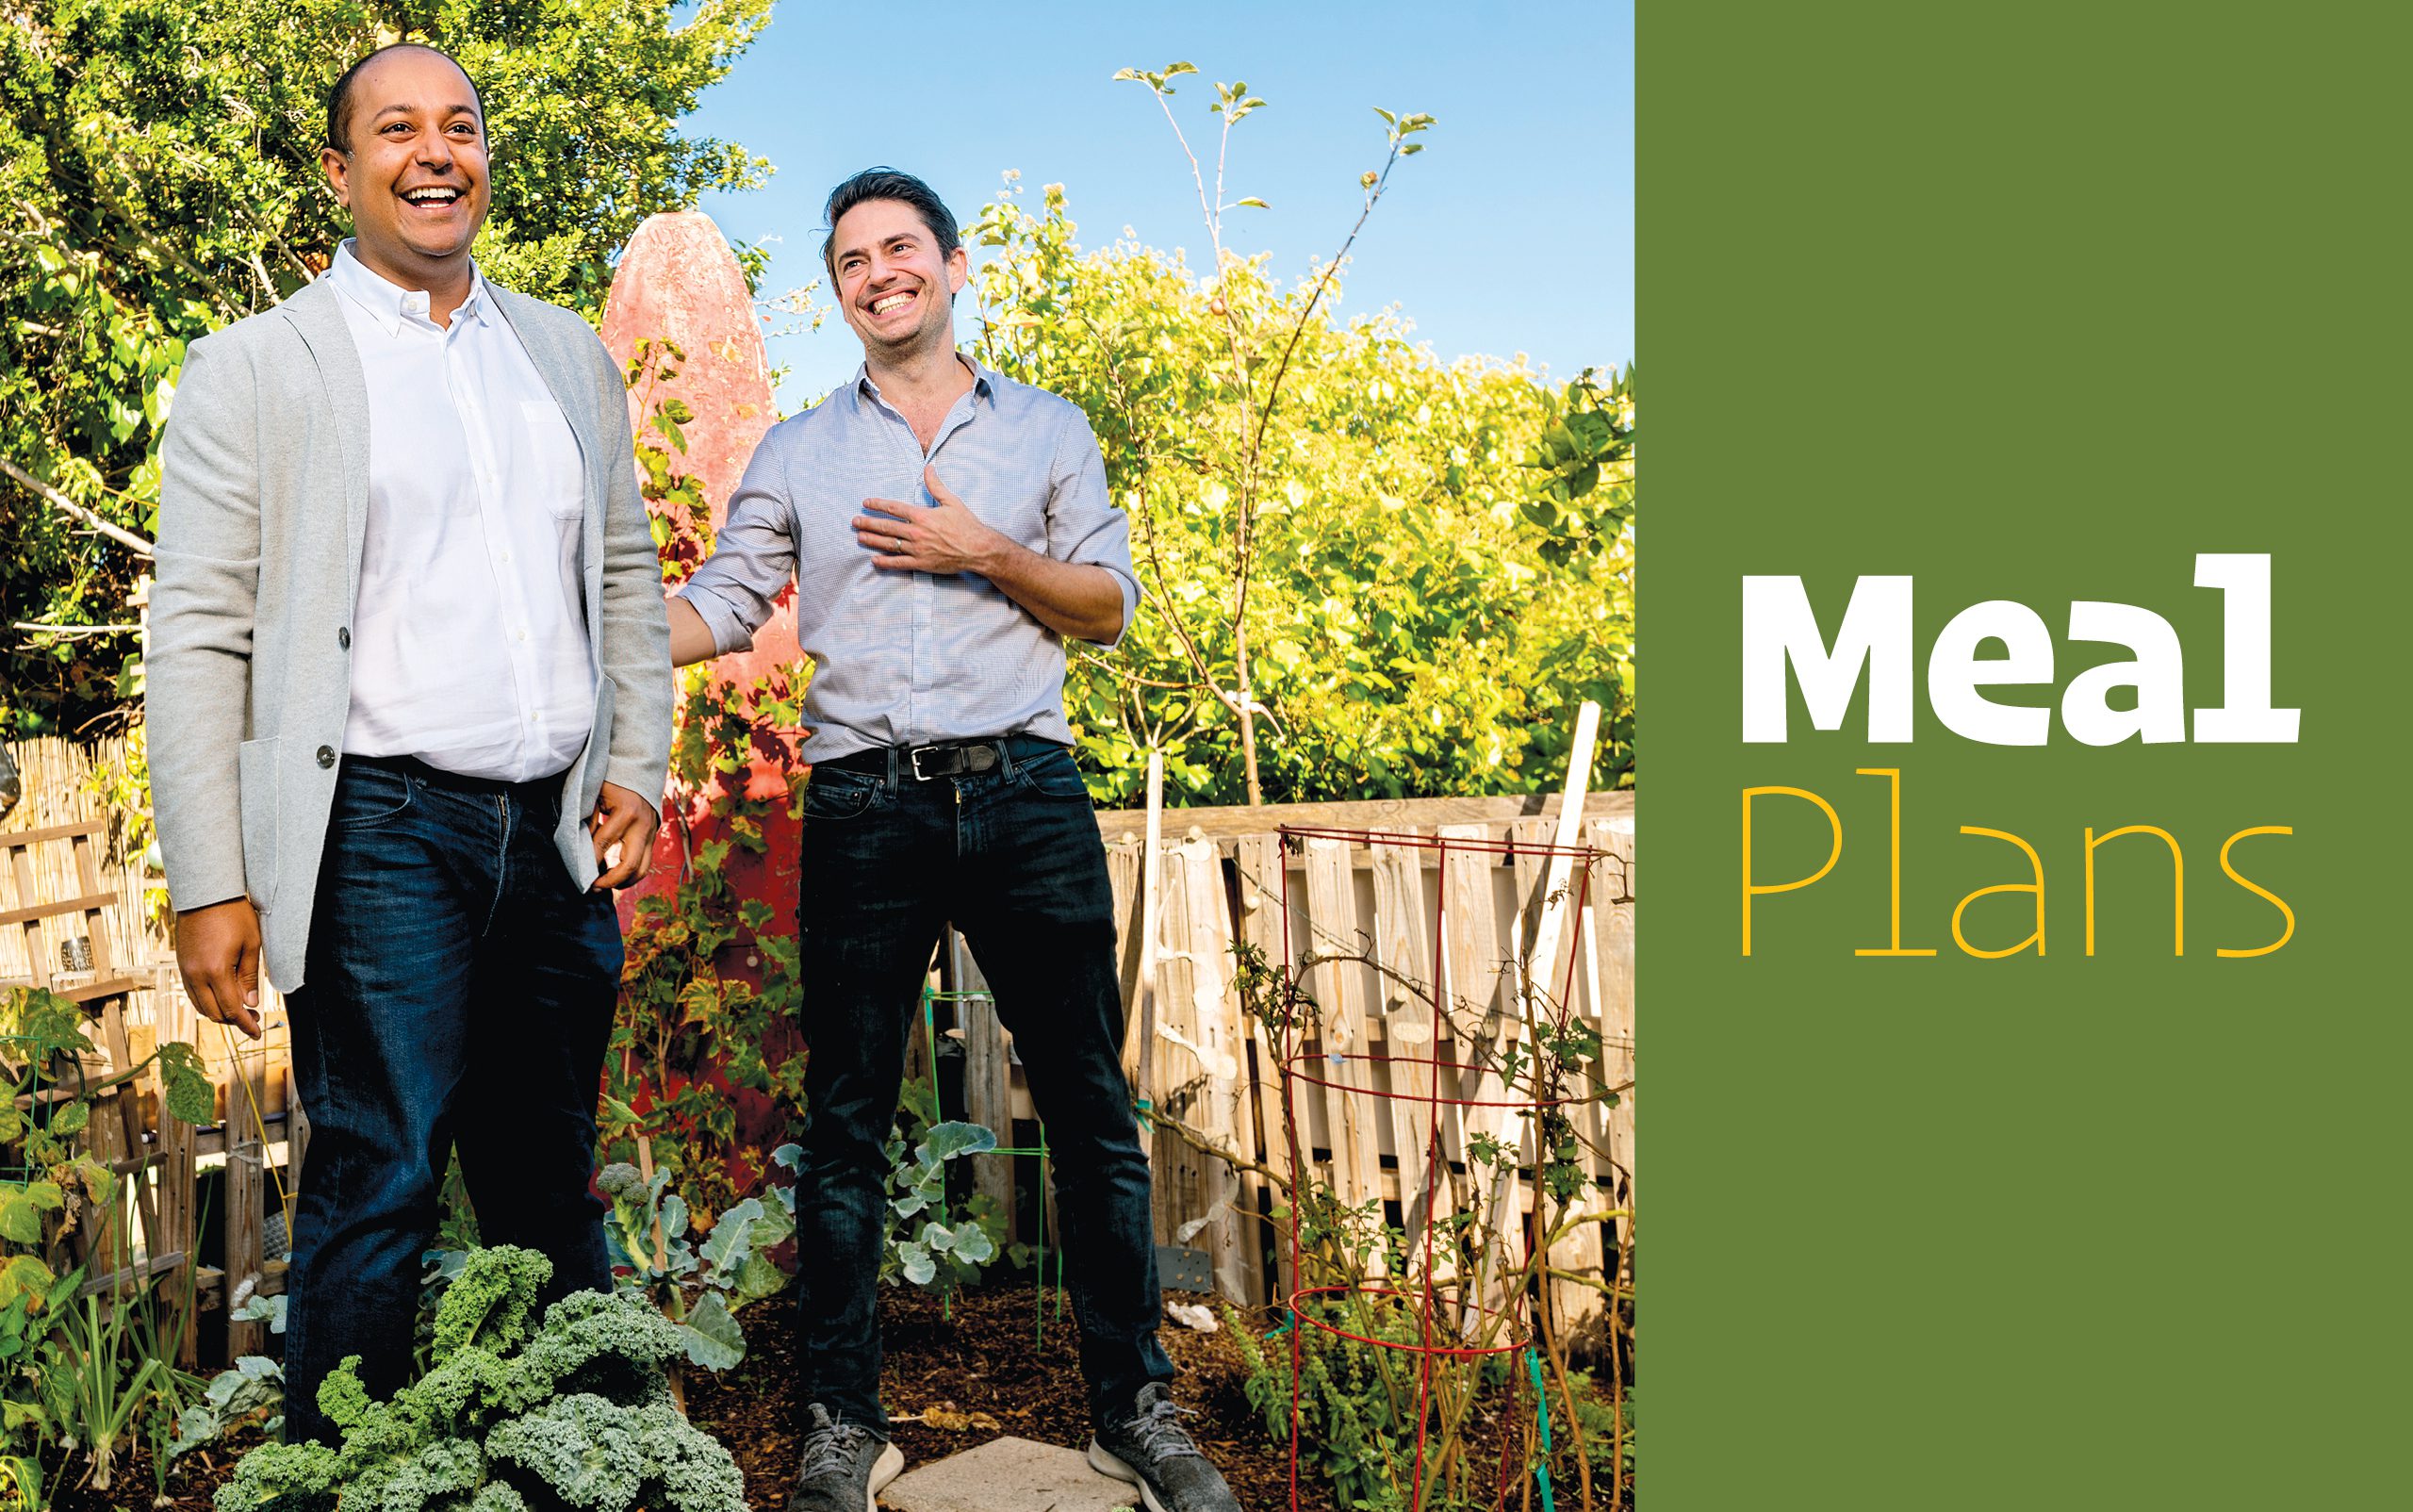 Adrian Rodrigues and Francois-Jerome Selosse, both MBA 18, standing in a garden smiling. The pair co-founded Provenance Capital Group to tackle what they deem one of the greatest challenges of their generation: how to finance regenerative agriculture systems.